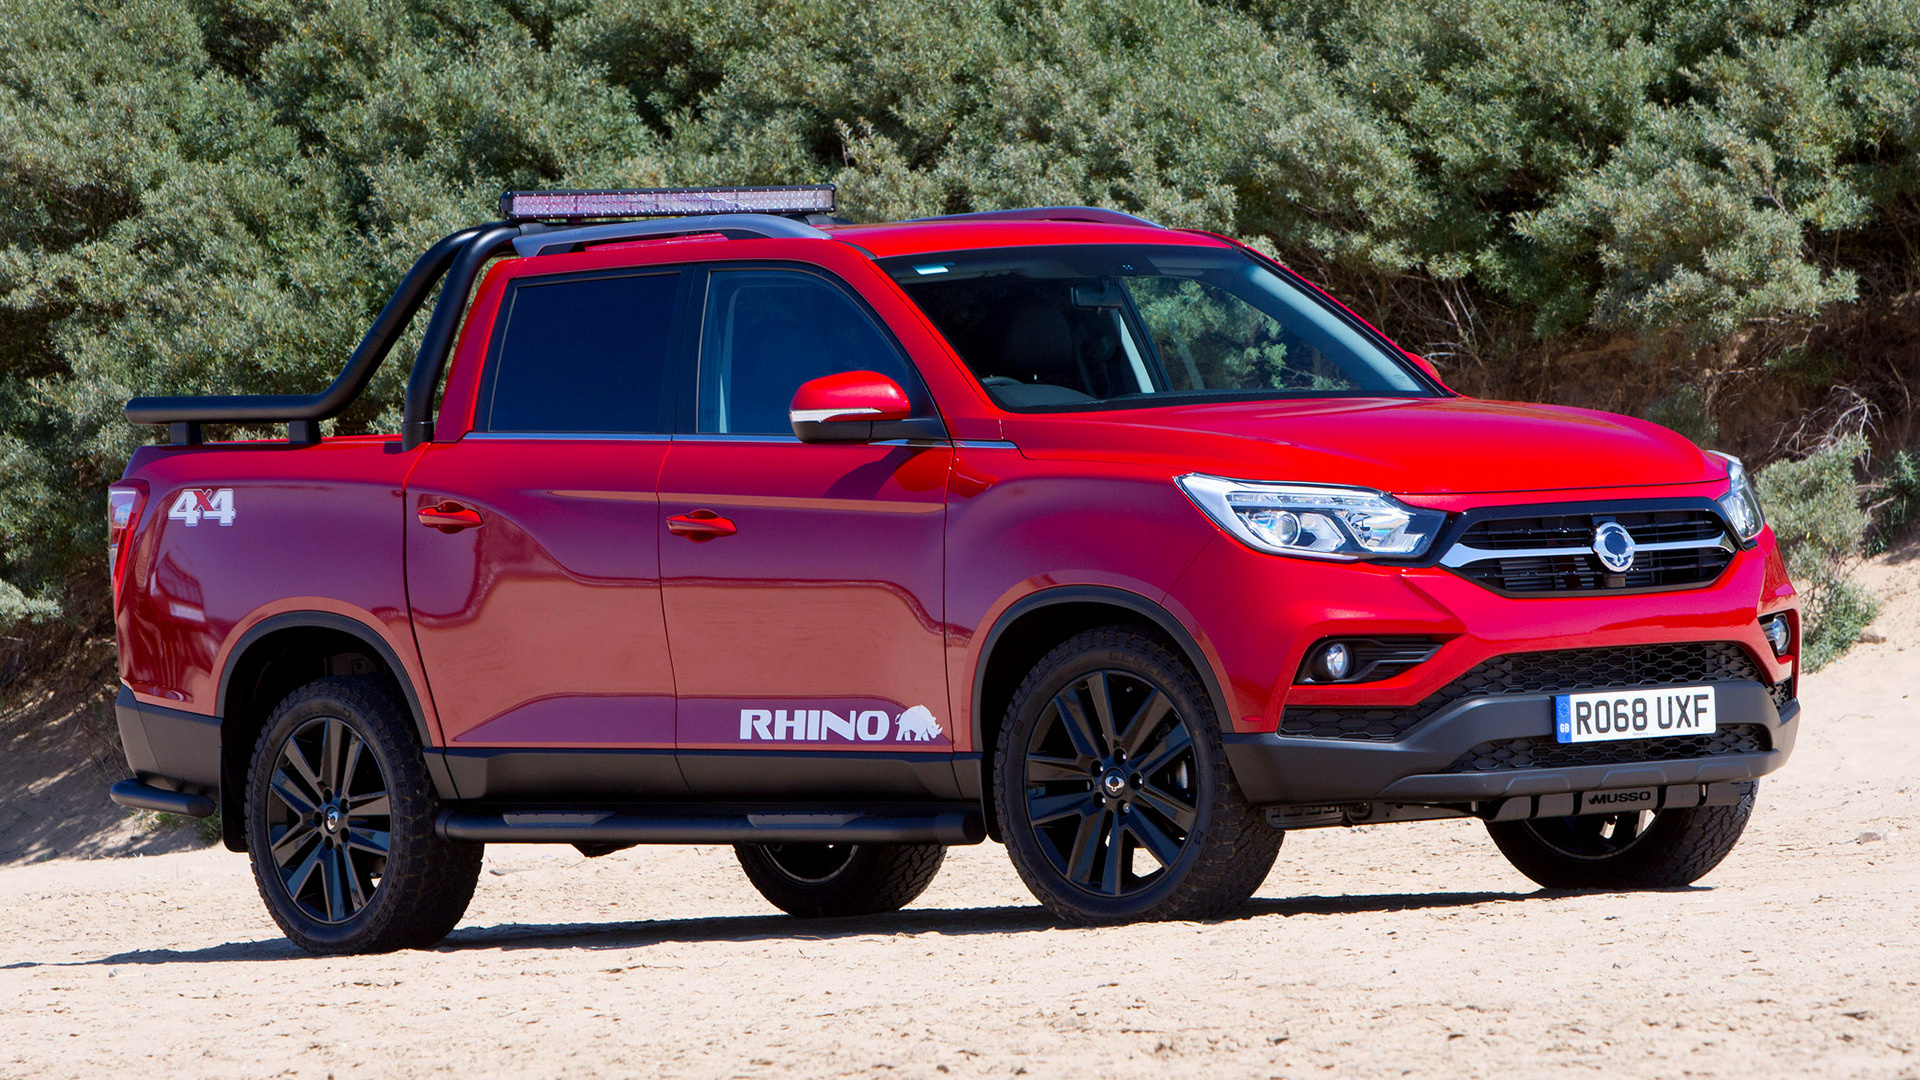 2018 SsangYong Musso Rhino (UK) - Wallpapers and HD Images | Car Pixel